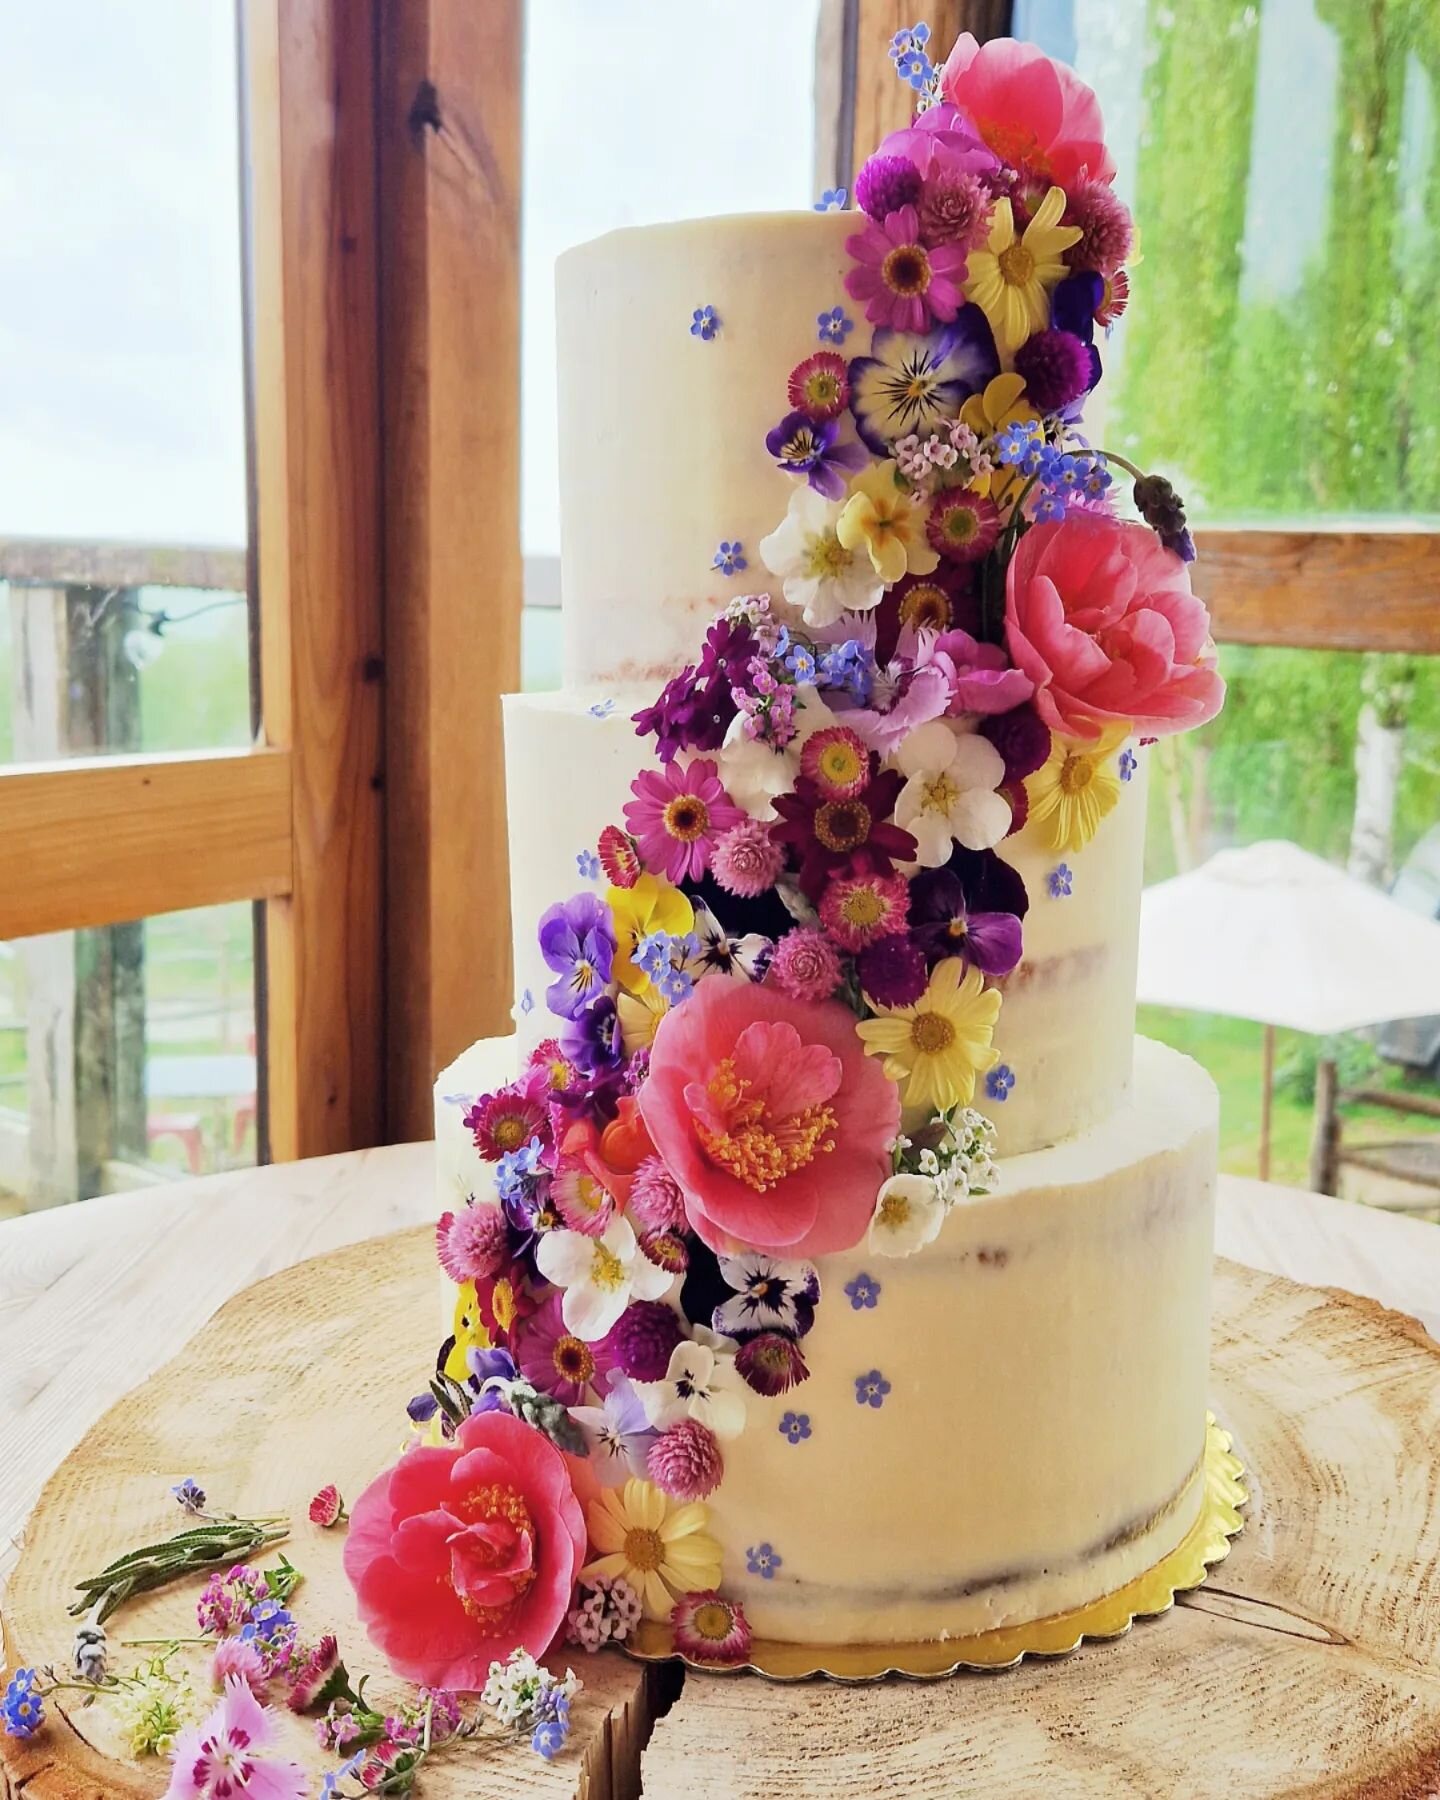 Floral Feast 🌸

Maria &amp; Tom's stunning edible flower wedding cake!

And just look at their beautiful seasonal flowers and this magical venue near Royal Tunbridge Wells. 

It was a joy to collaborate on such a natural, seasonal, and environmental